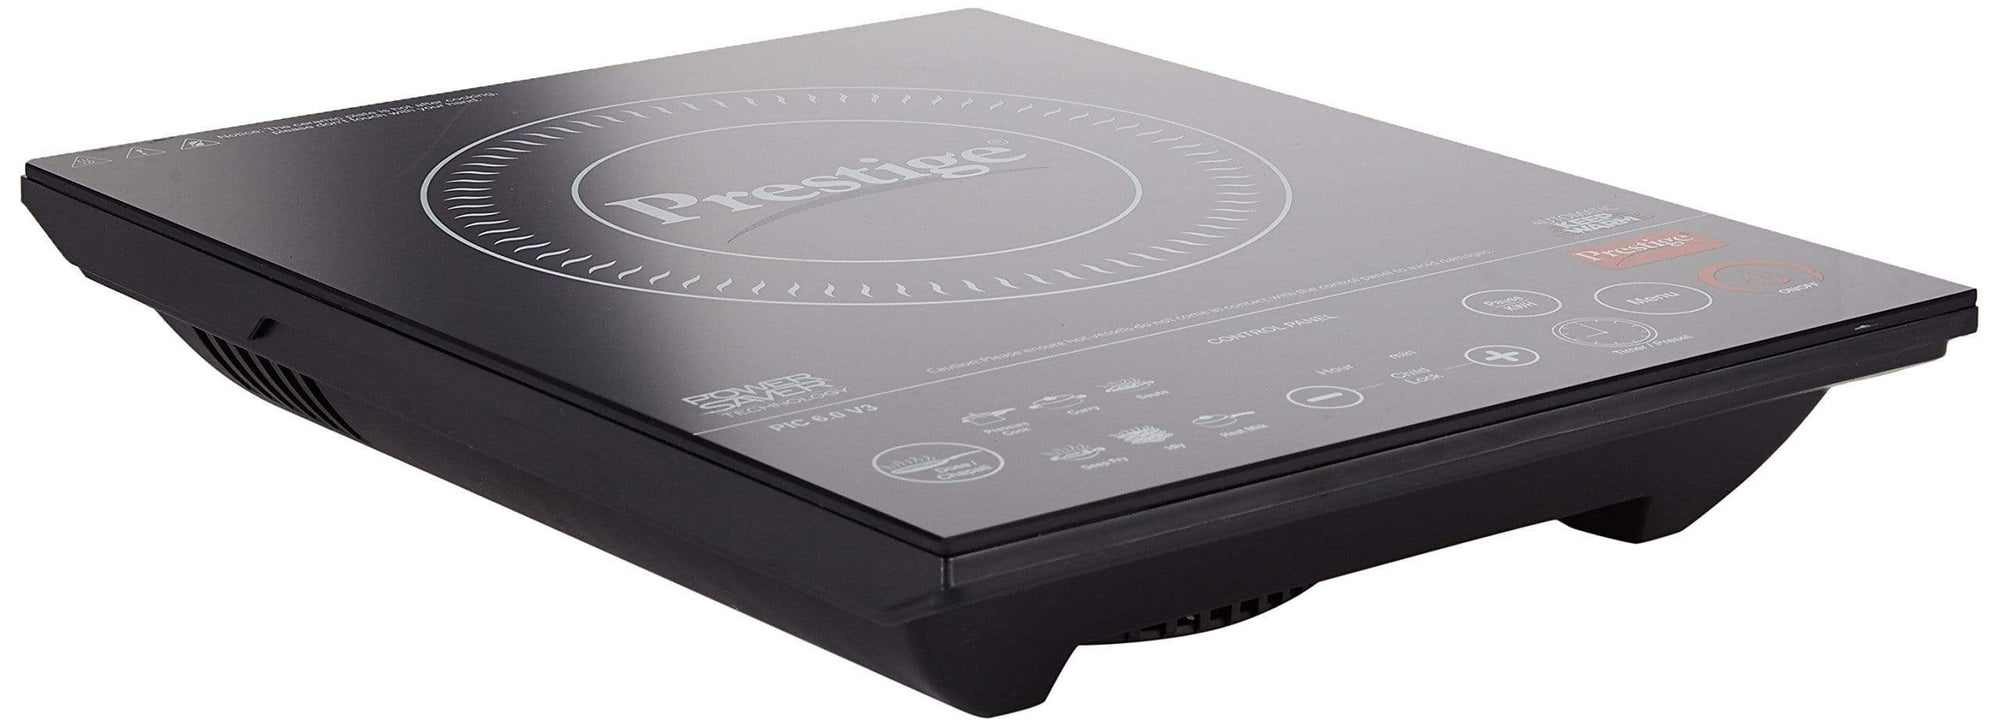 Prestige PIC 6.1 V3 2000-Watt Induction Cooktop with Touch Panel, Black - KITCHEN MART